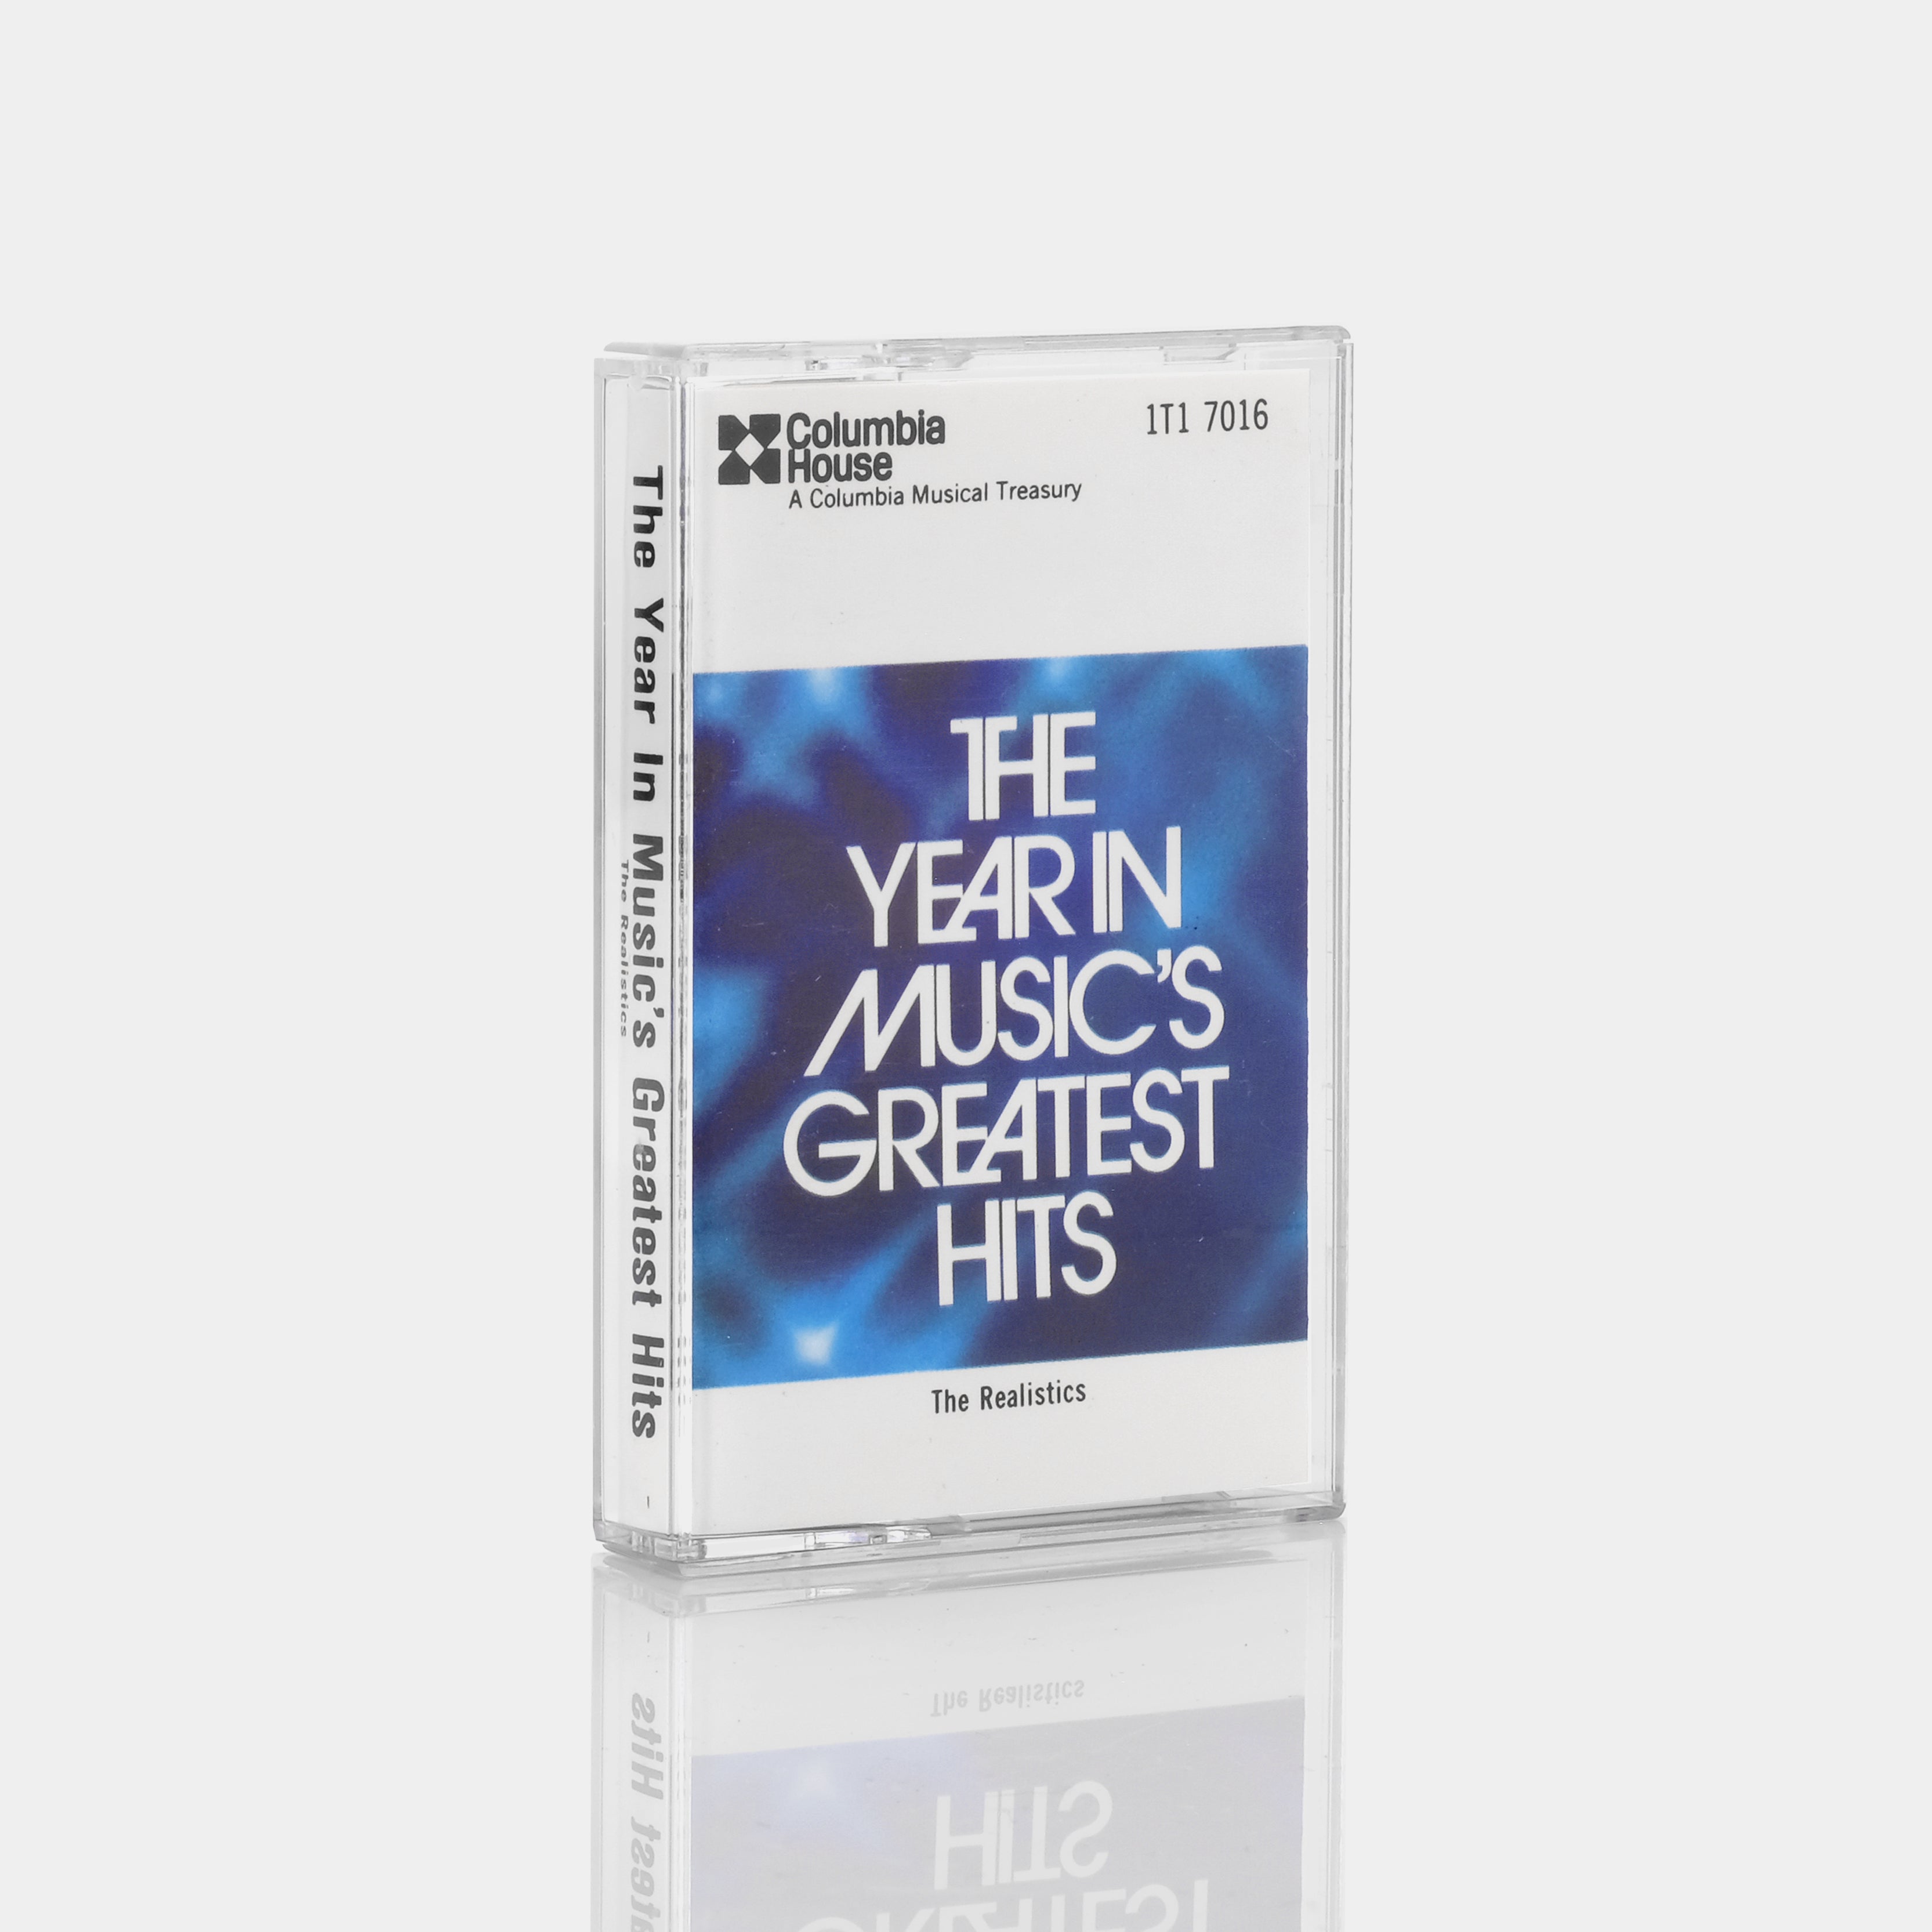 The Realistics - The Year In Music's Greatest Hits Cassette Tape